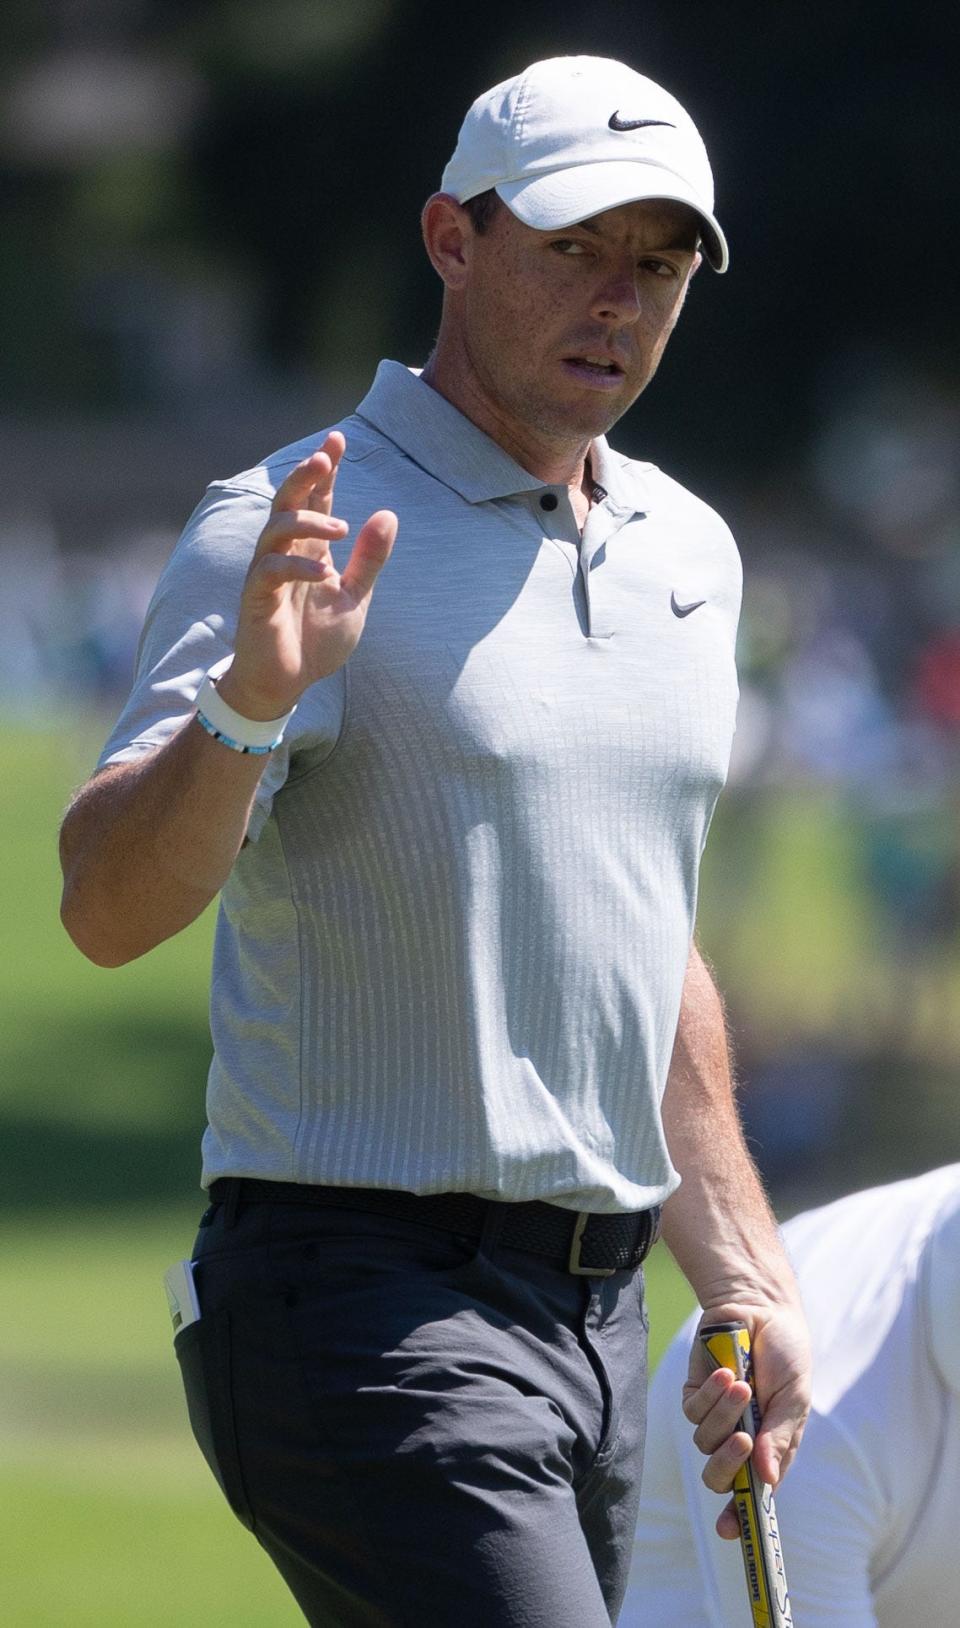 Rory McIlroy waves to the crowd from the 1st hole during the second-round of the FedEx St. Jude Championship on Friday, Aug. 12, 2022, at TPC Southwind in Memphis.